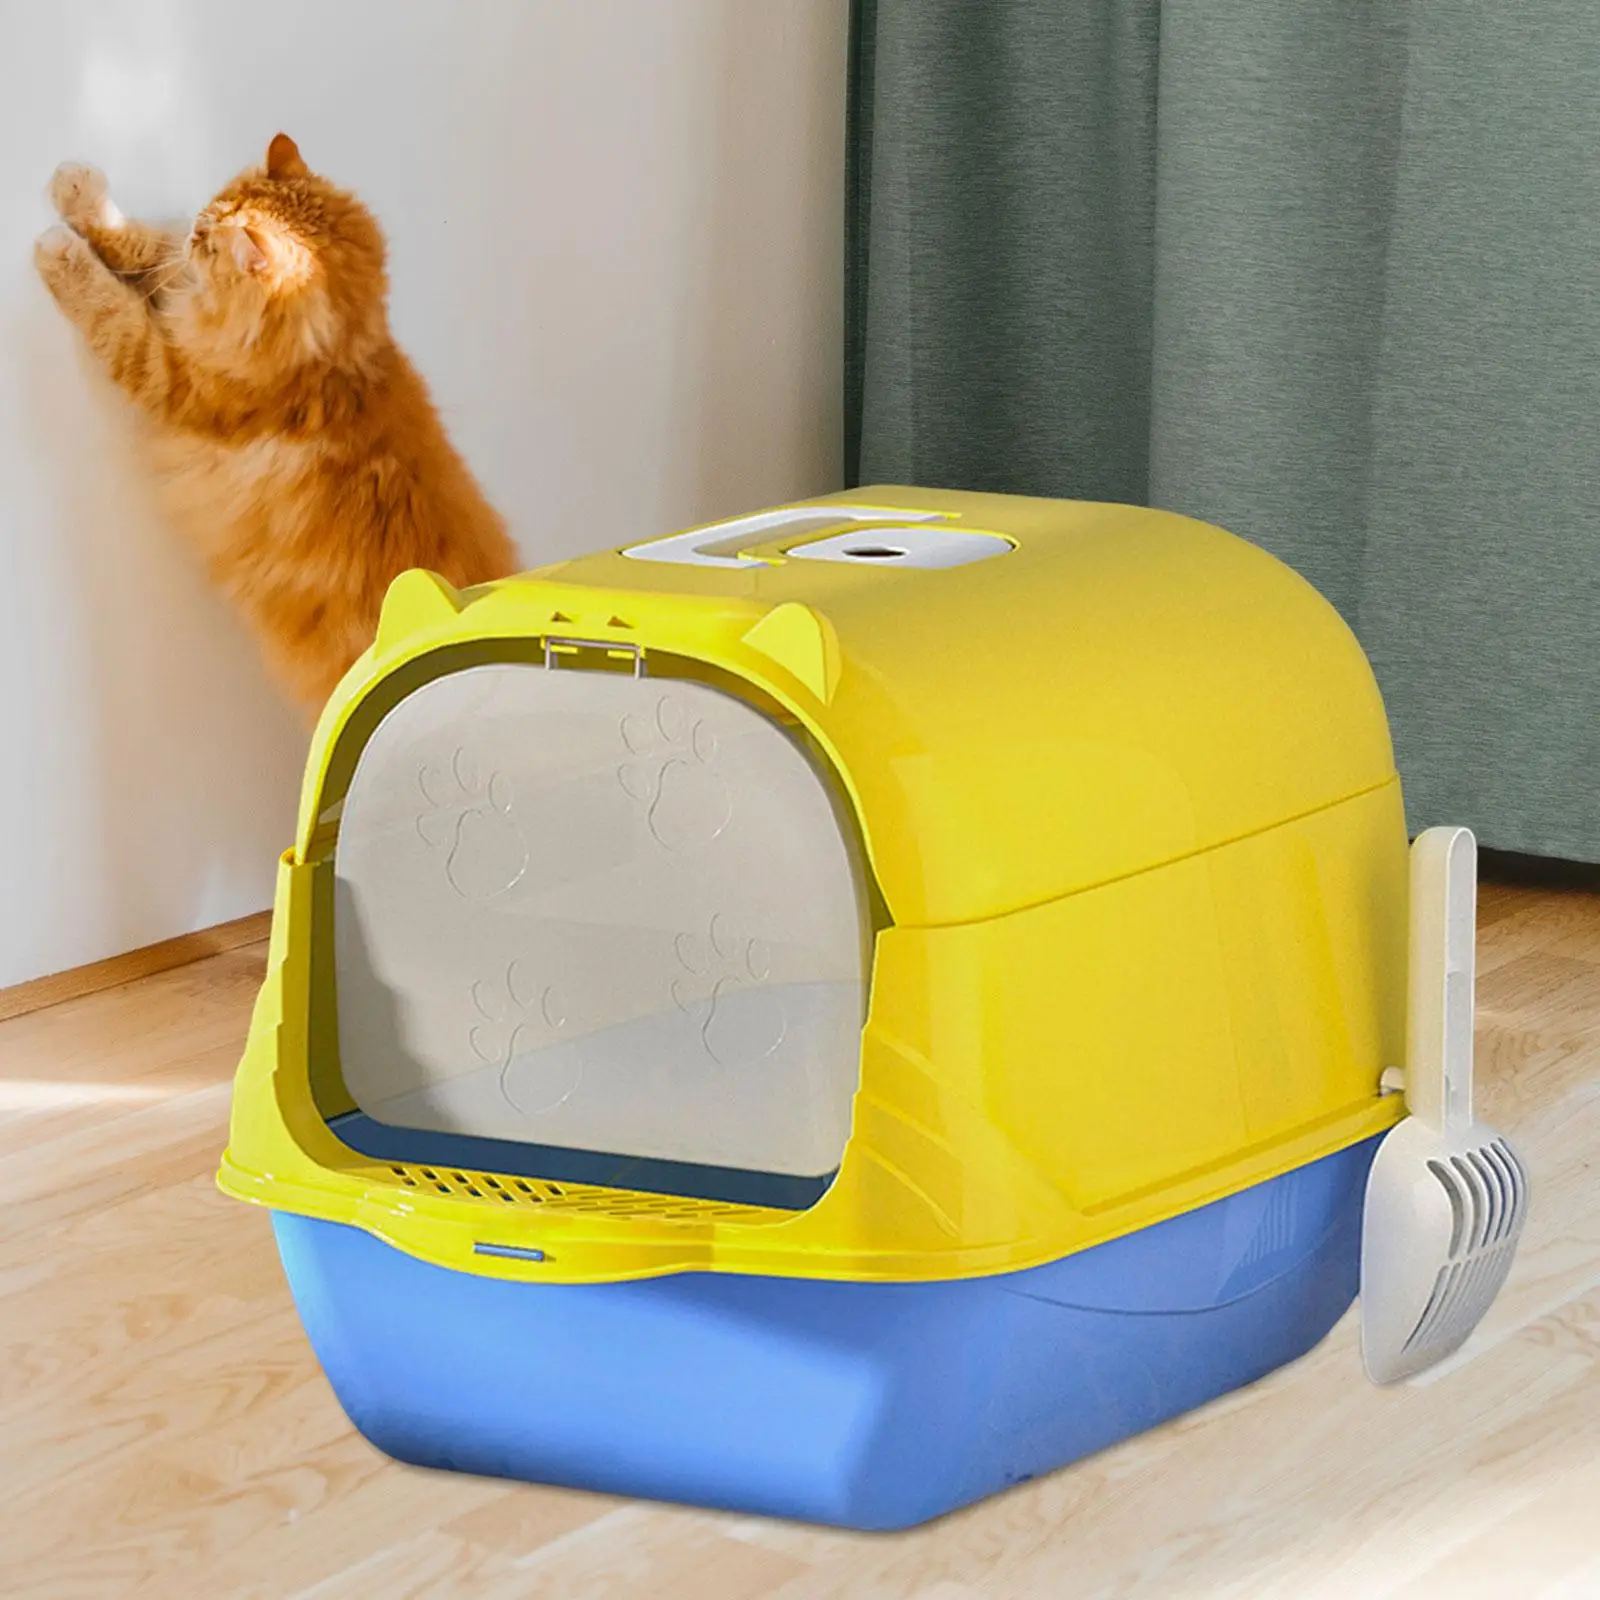 Hooded Cat Litter Box Durable Hollow Pedal Large Space Two Way Movable Door Anti Splashing with Scoop Enclosed Cat Toilet